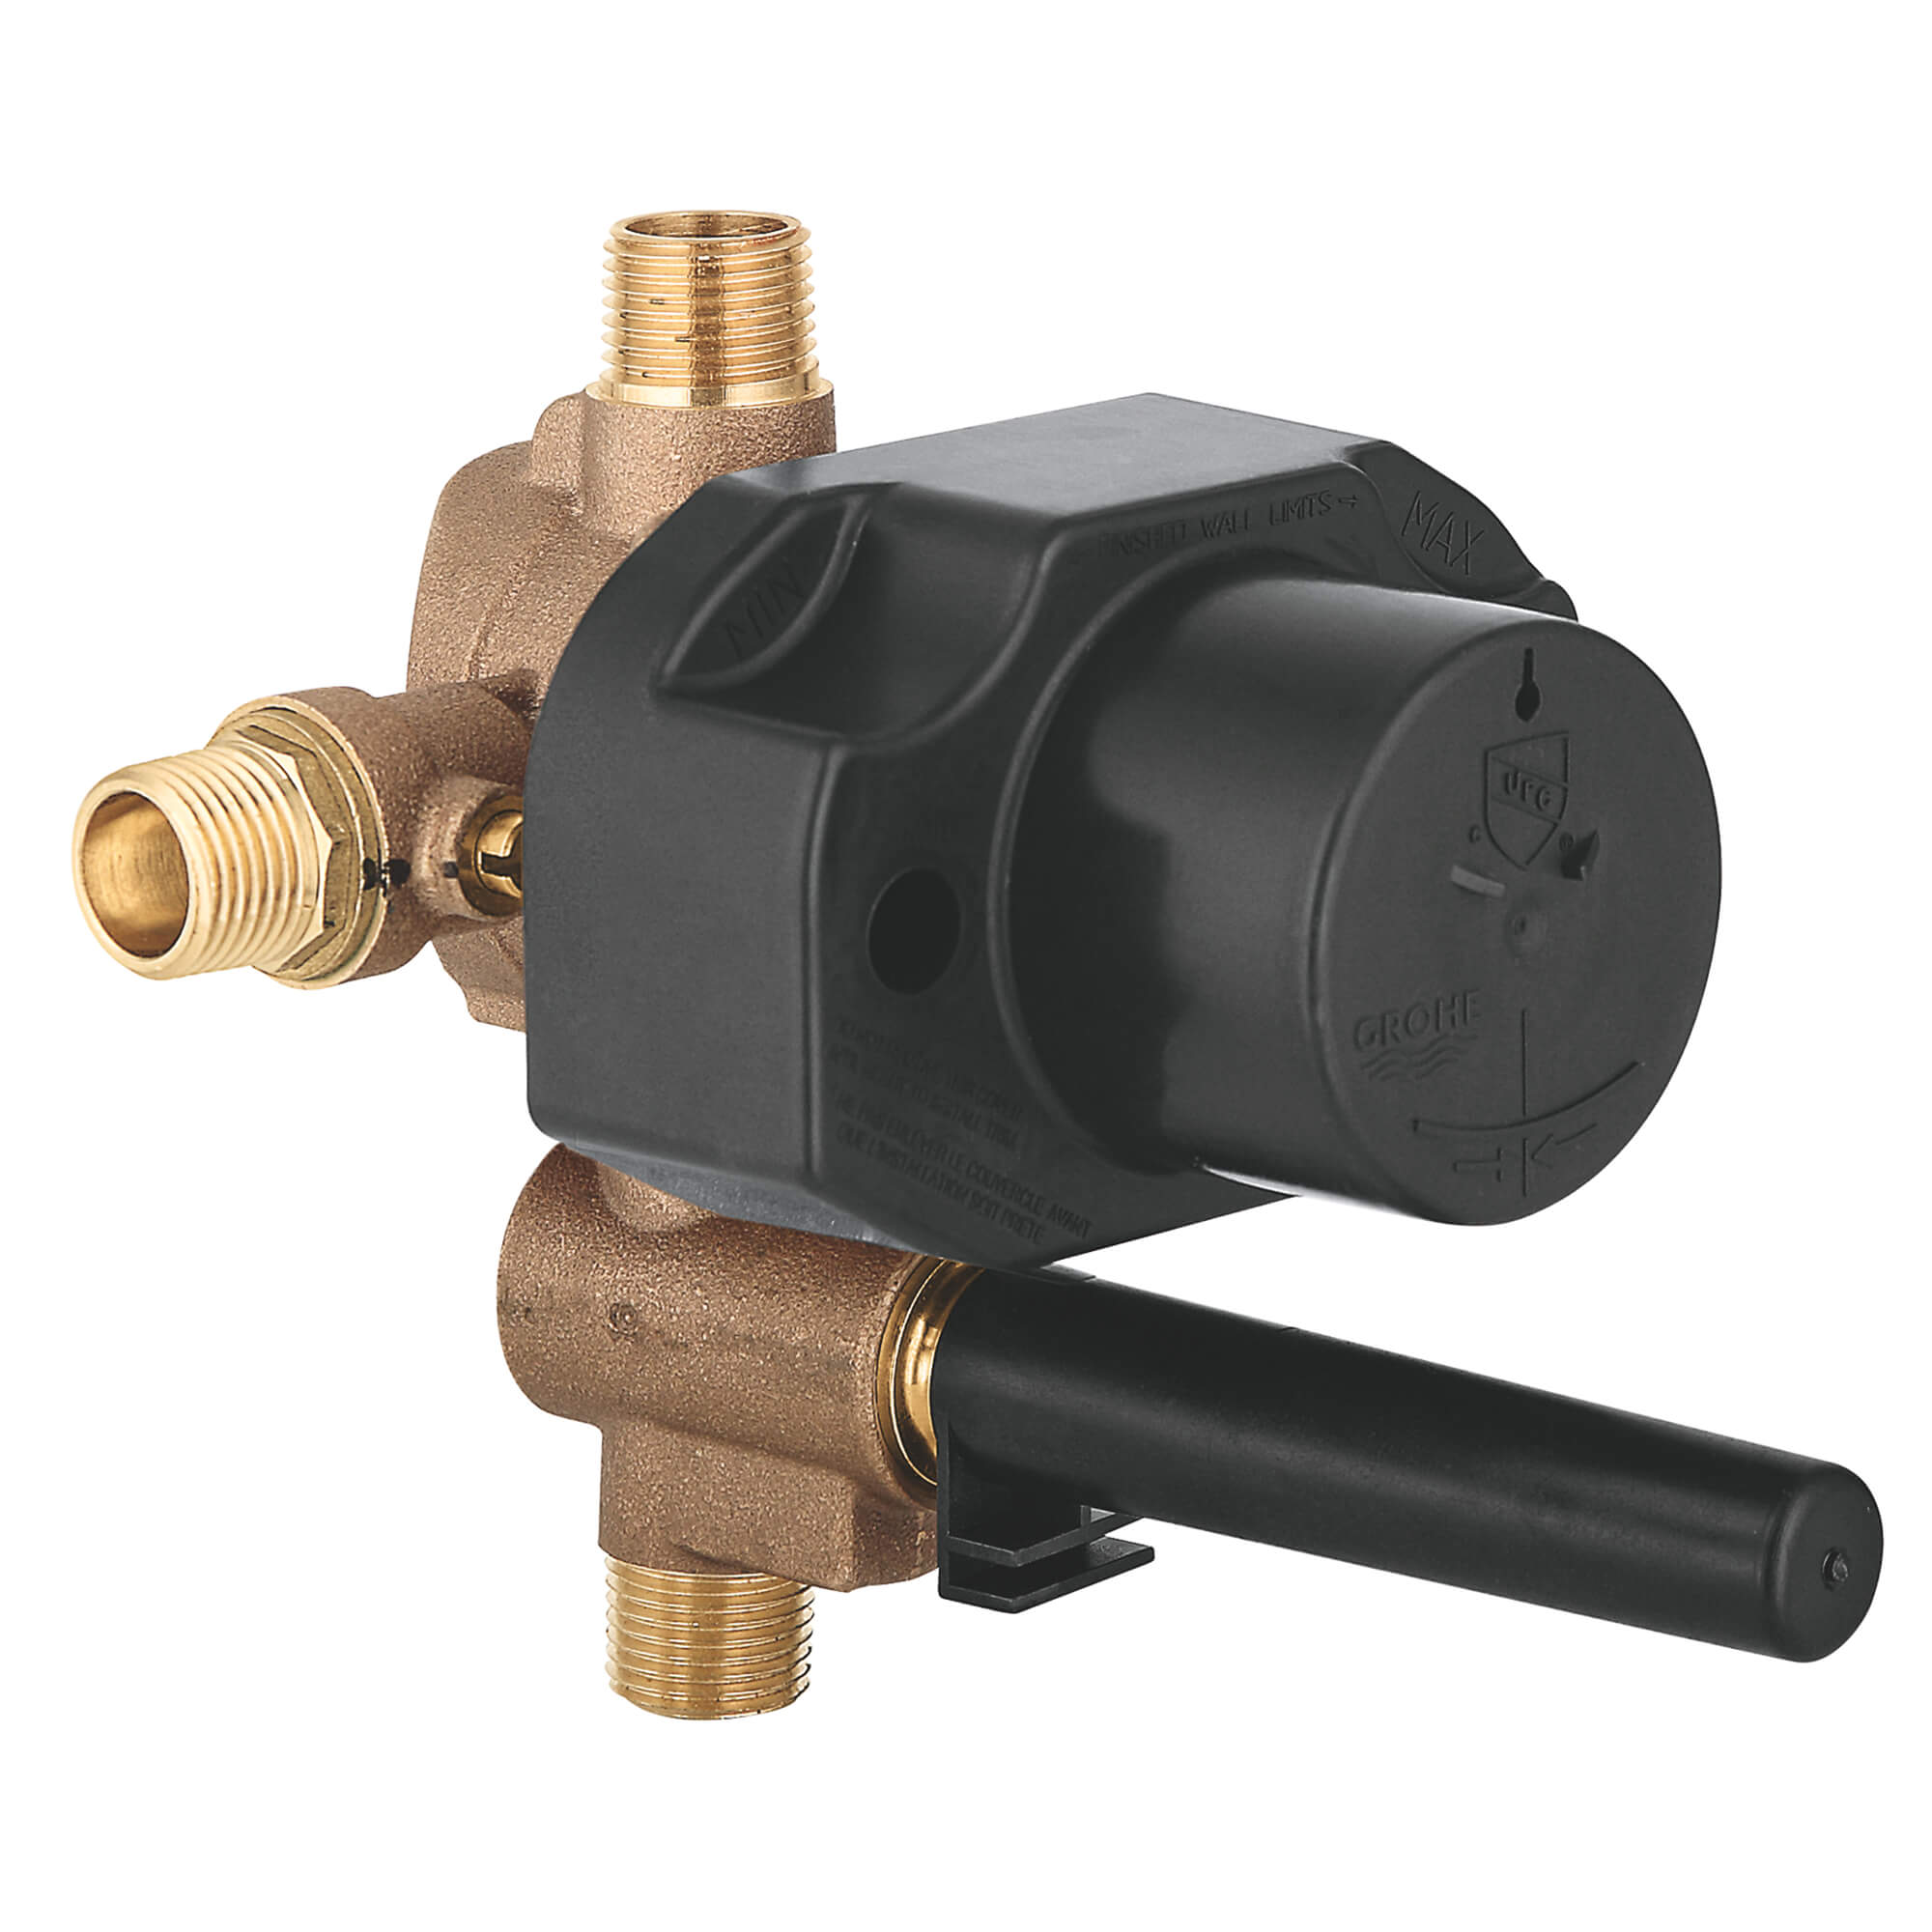 Pressure Balance Rough-In Valve with Built-in Diverter